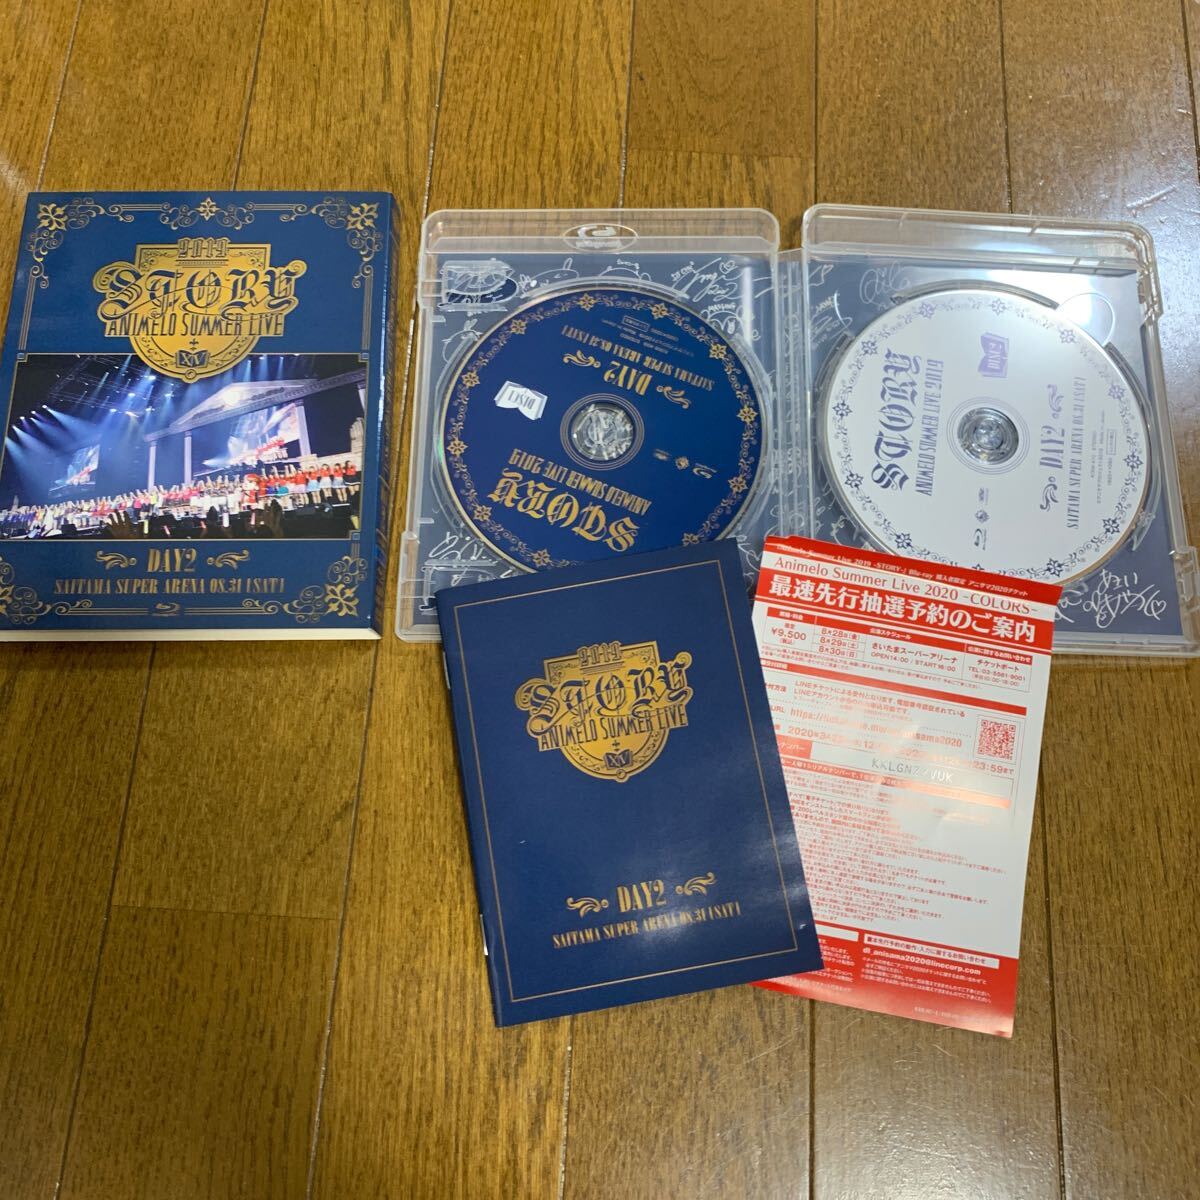 Animelo Summer Live 2019-STORY- DAY1 DAY2 DAY3 Blu-ray 3点セットの画像3